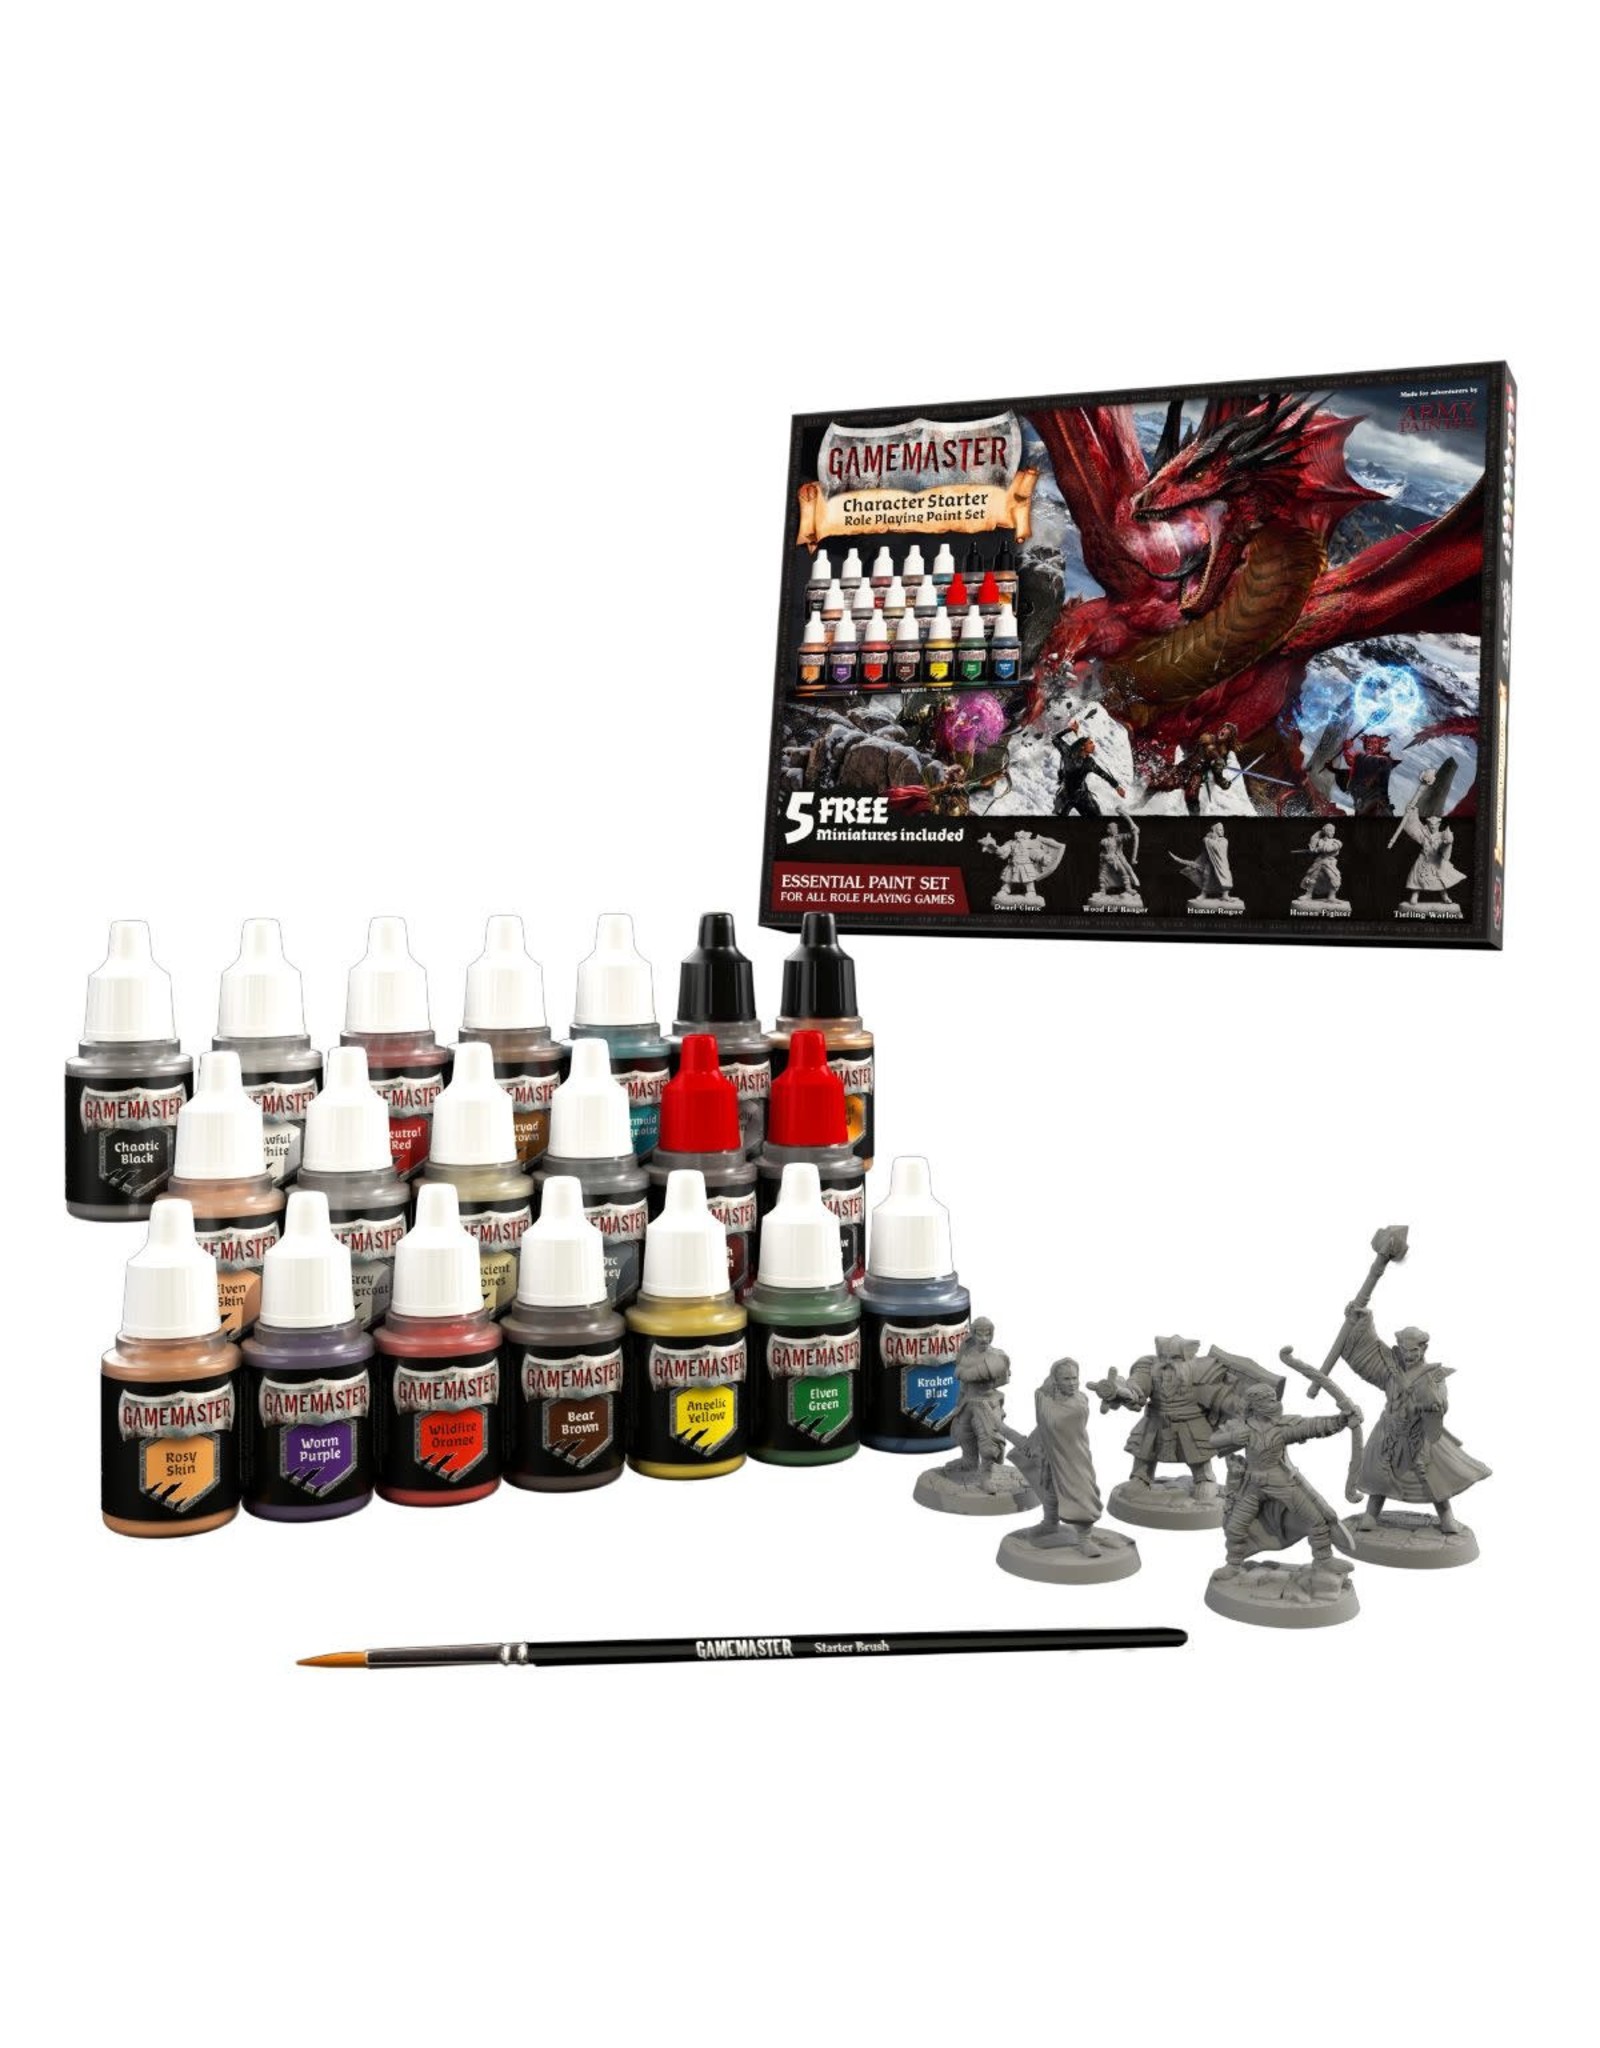 The Army Painter The Army Painter Gamemaster Character Paint Set